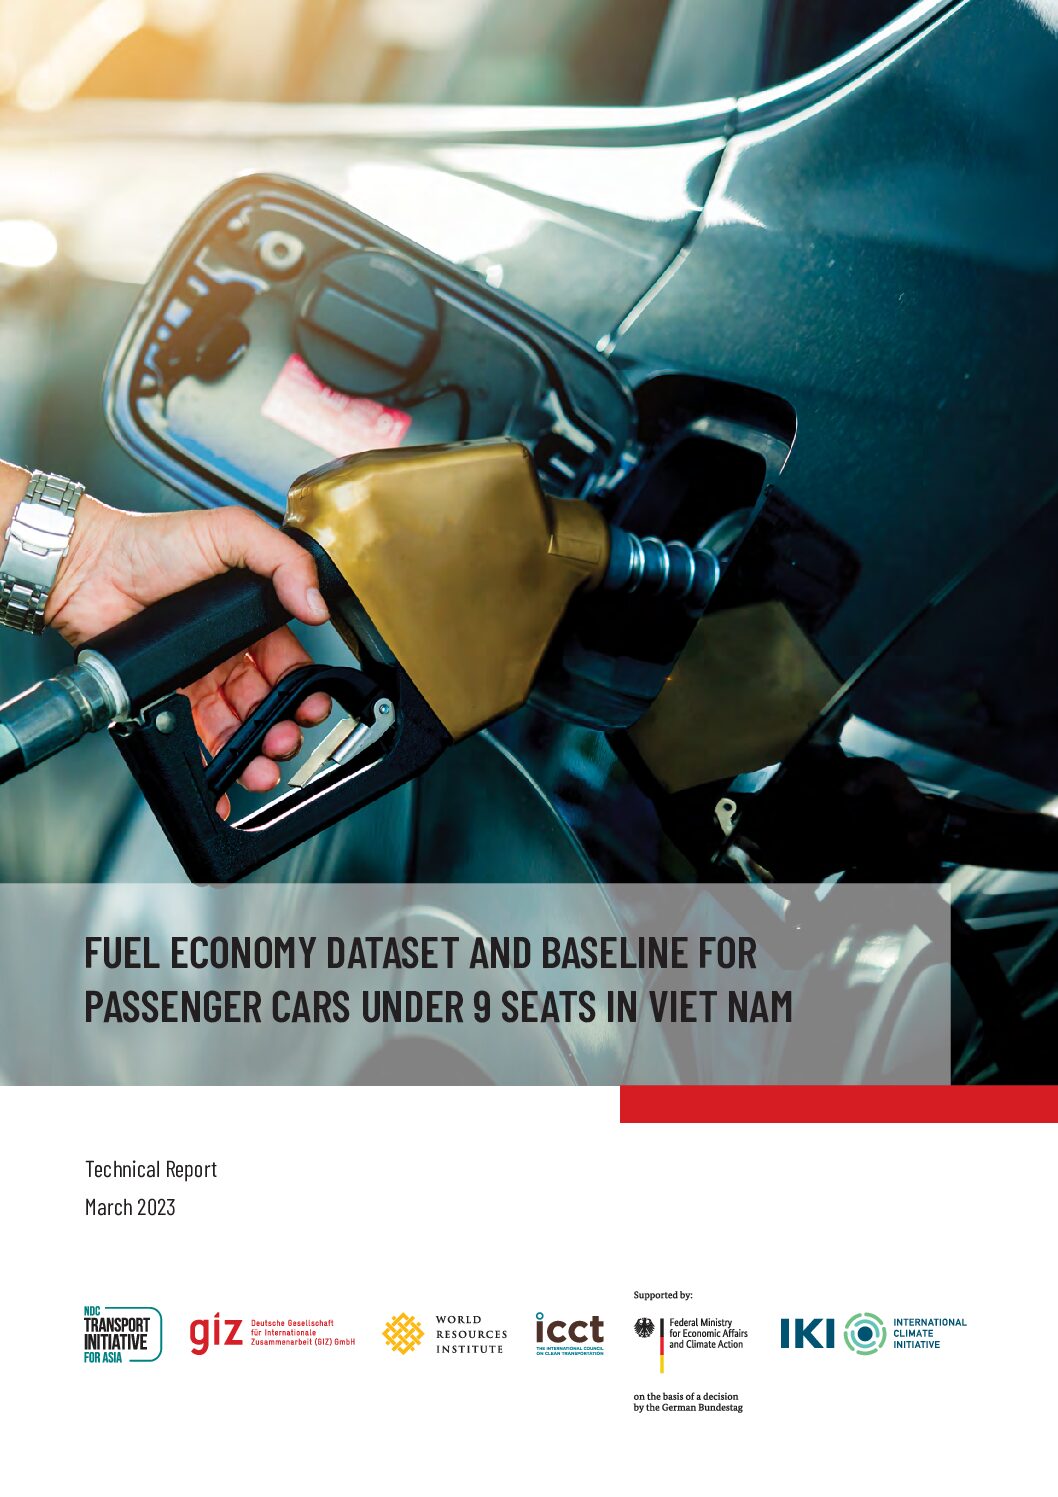 Fuel Economy Dataset and Baseline for Passenger Cars under 9 Seats in Viet Nam